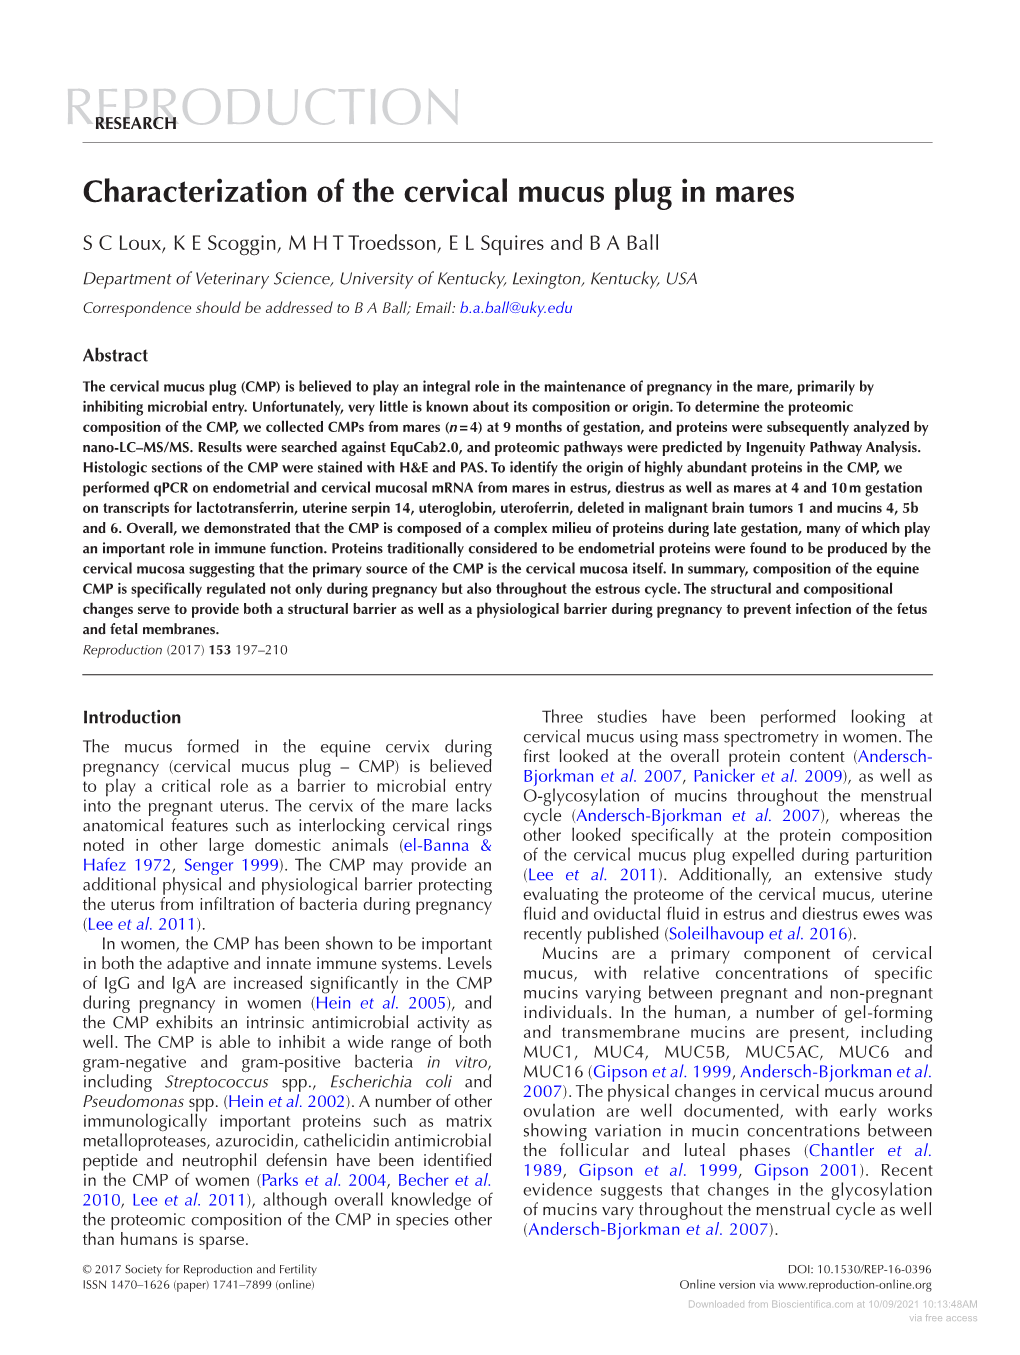 Characterization of the Cervical Mucus Plug in Mares